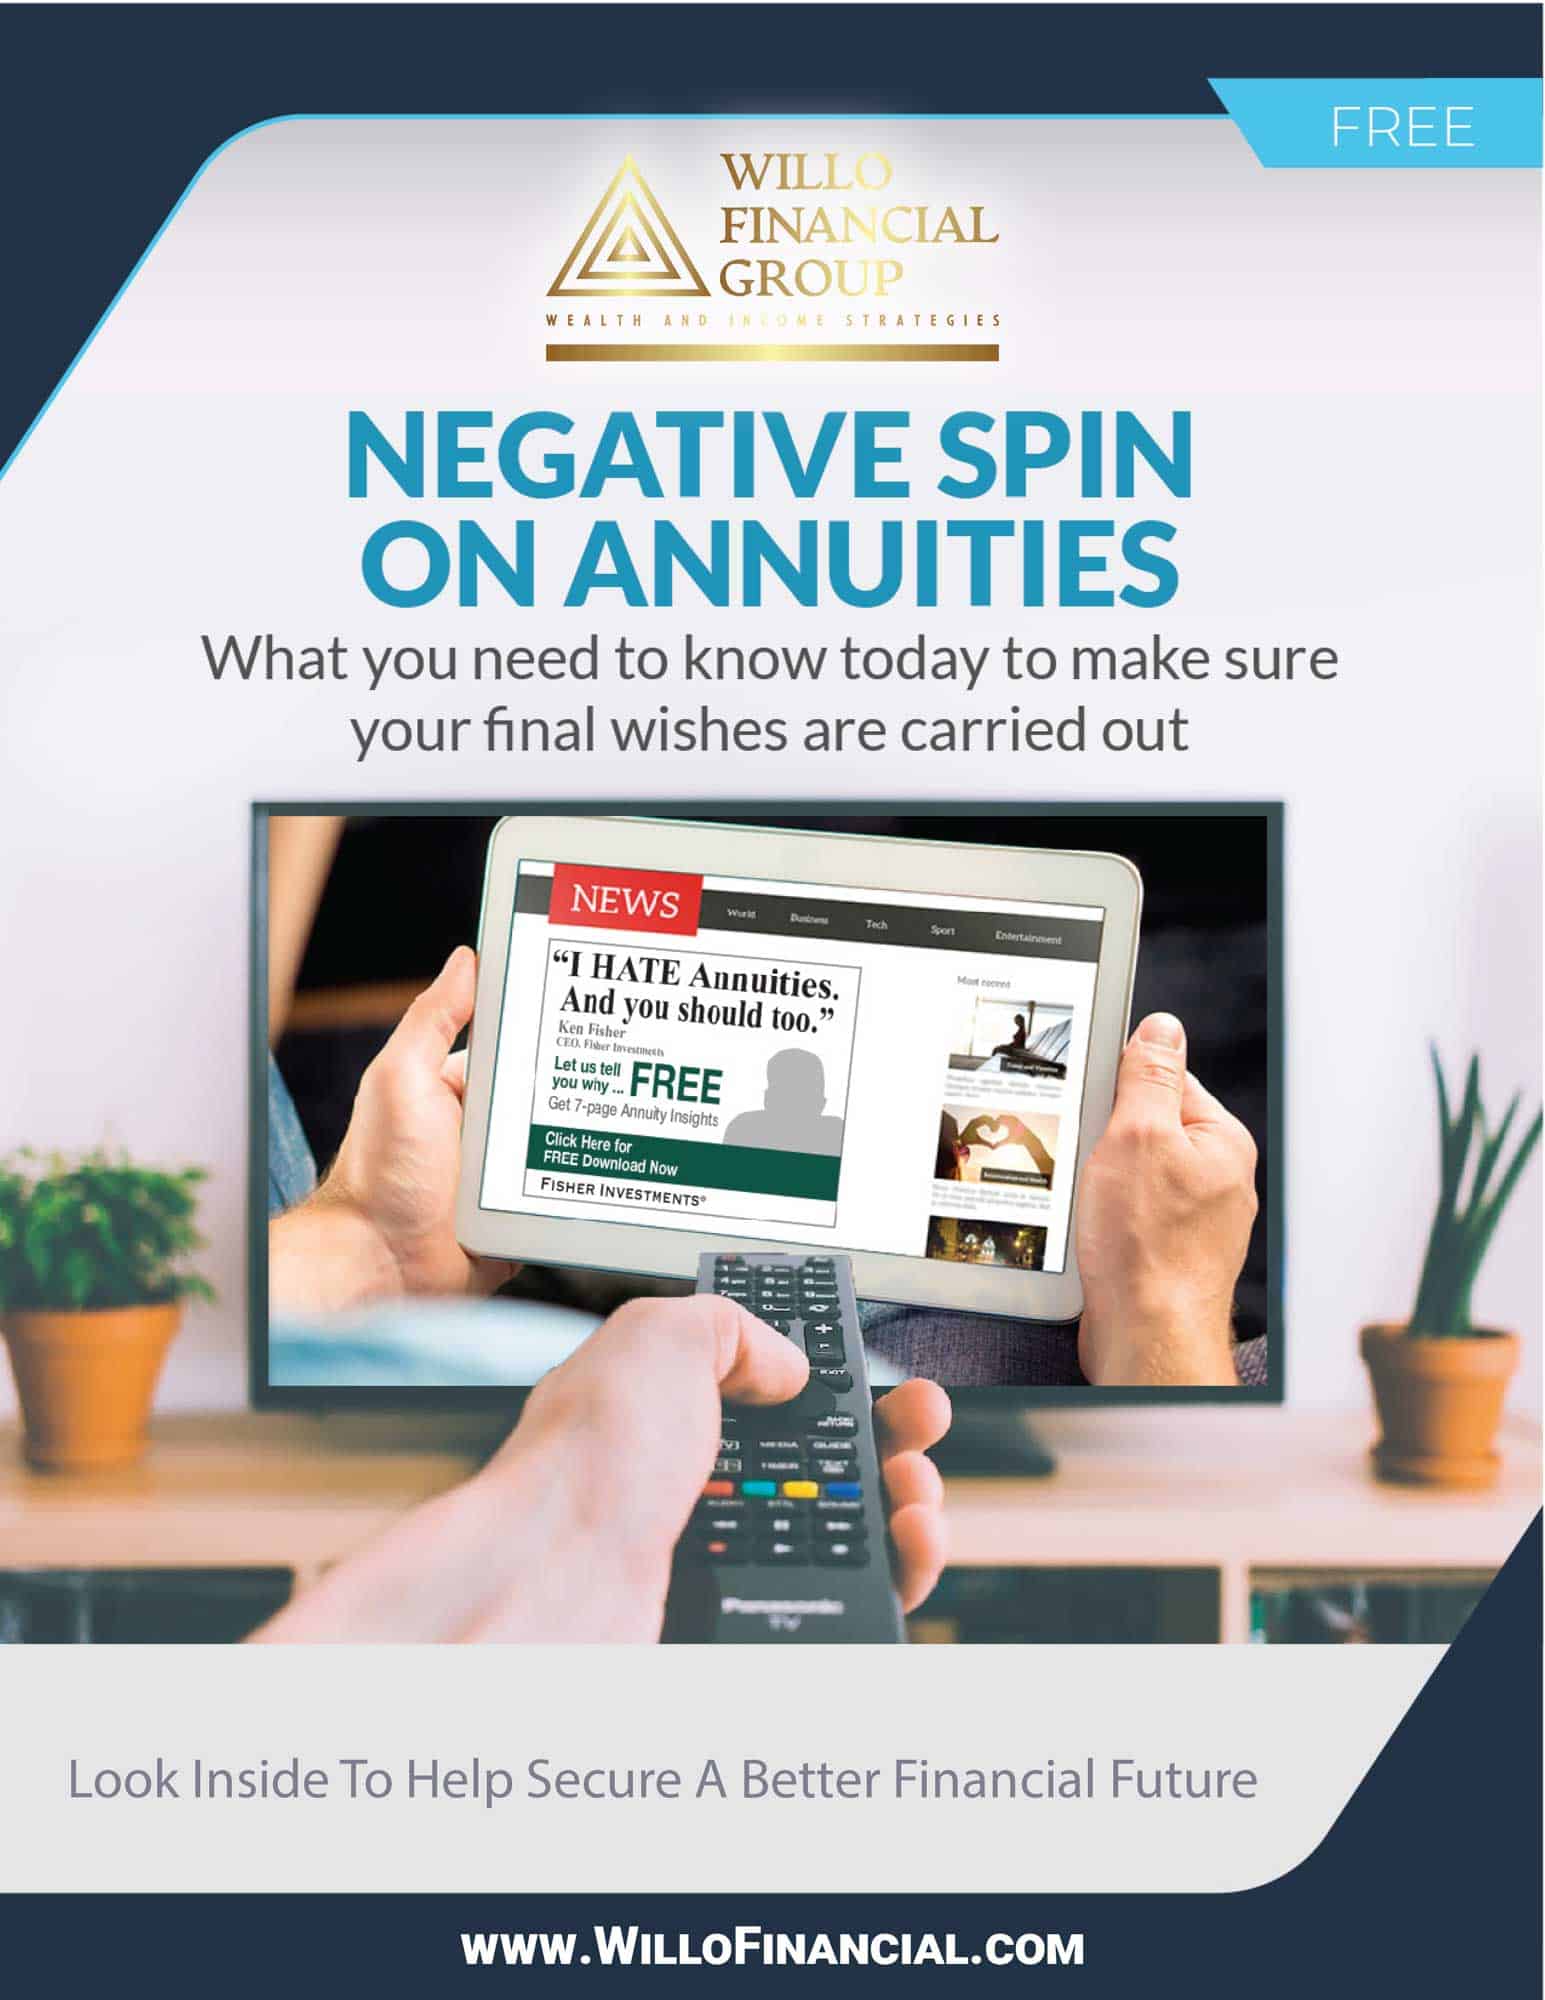 Negative Spin on Annuities